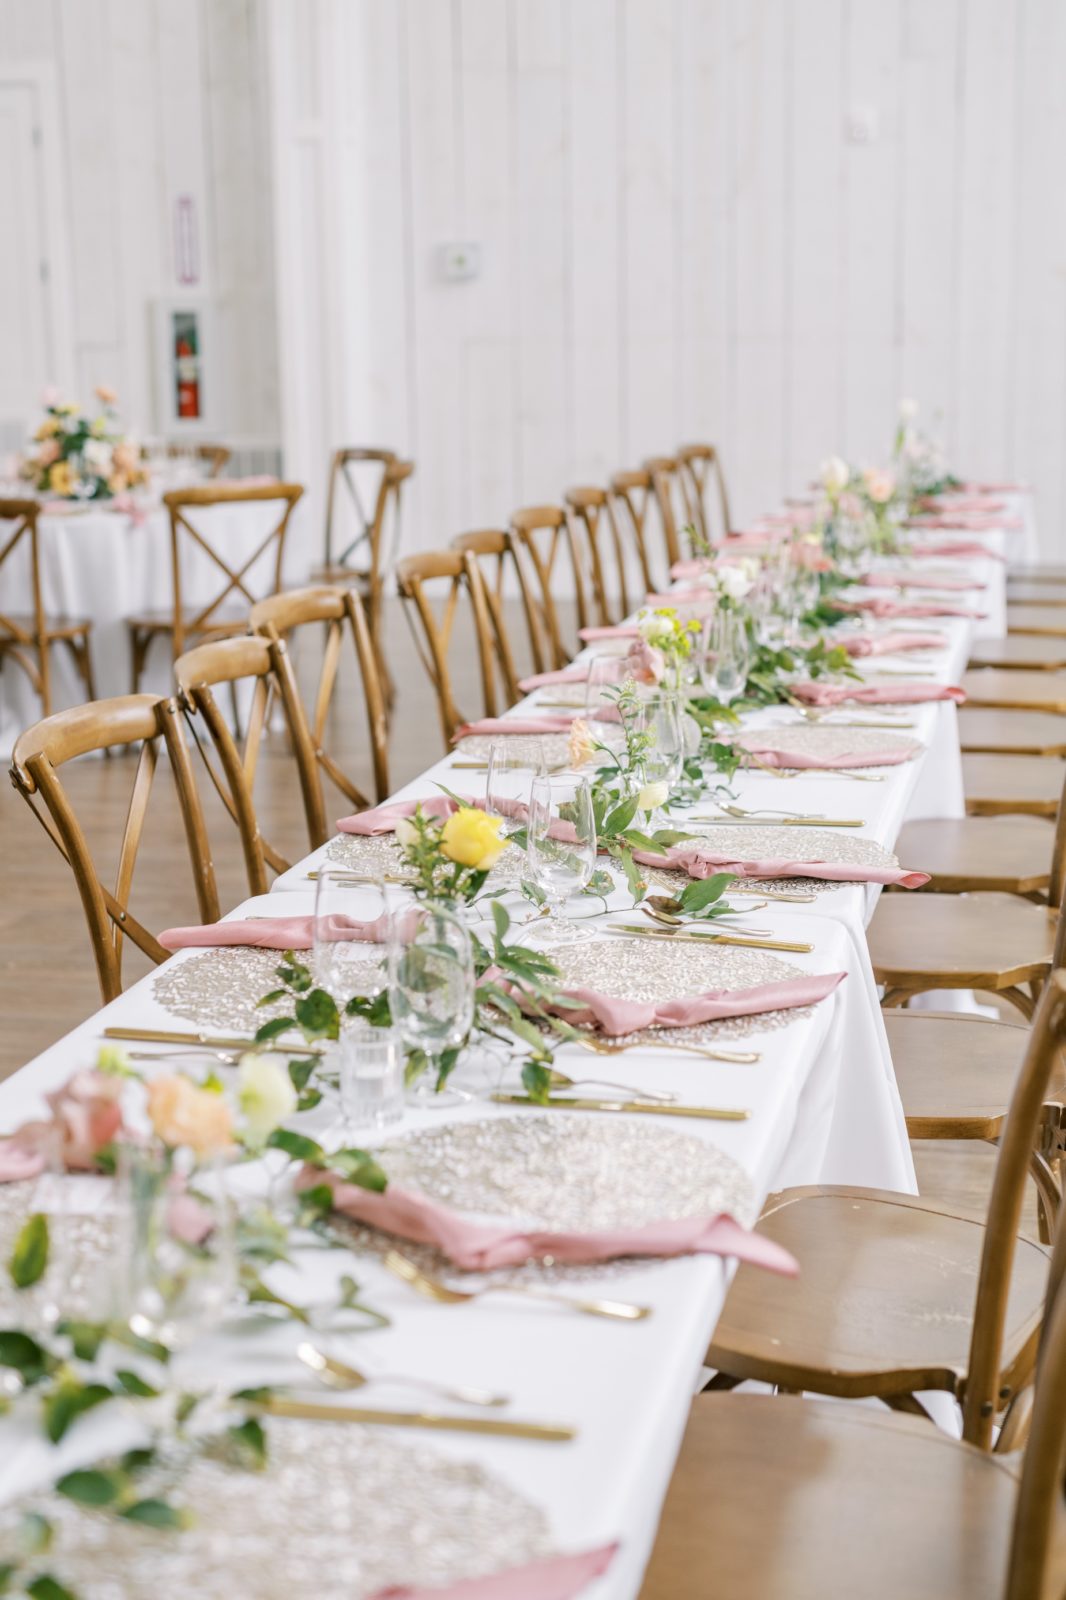 Wedding luncheon table with wooden chairs, pink napkins, and rose table decor by Christina Elliott Photography. spring luncheon #ChristinaElliottPhotography #ChristinaElliottWeddings #Houstonwedding #TheSpringsVenue #EastHoustonweddings #Mrs #Mr